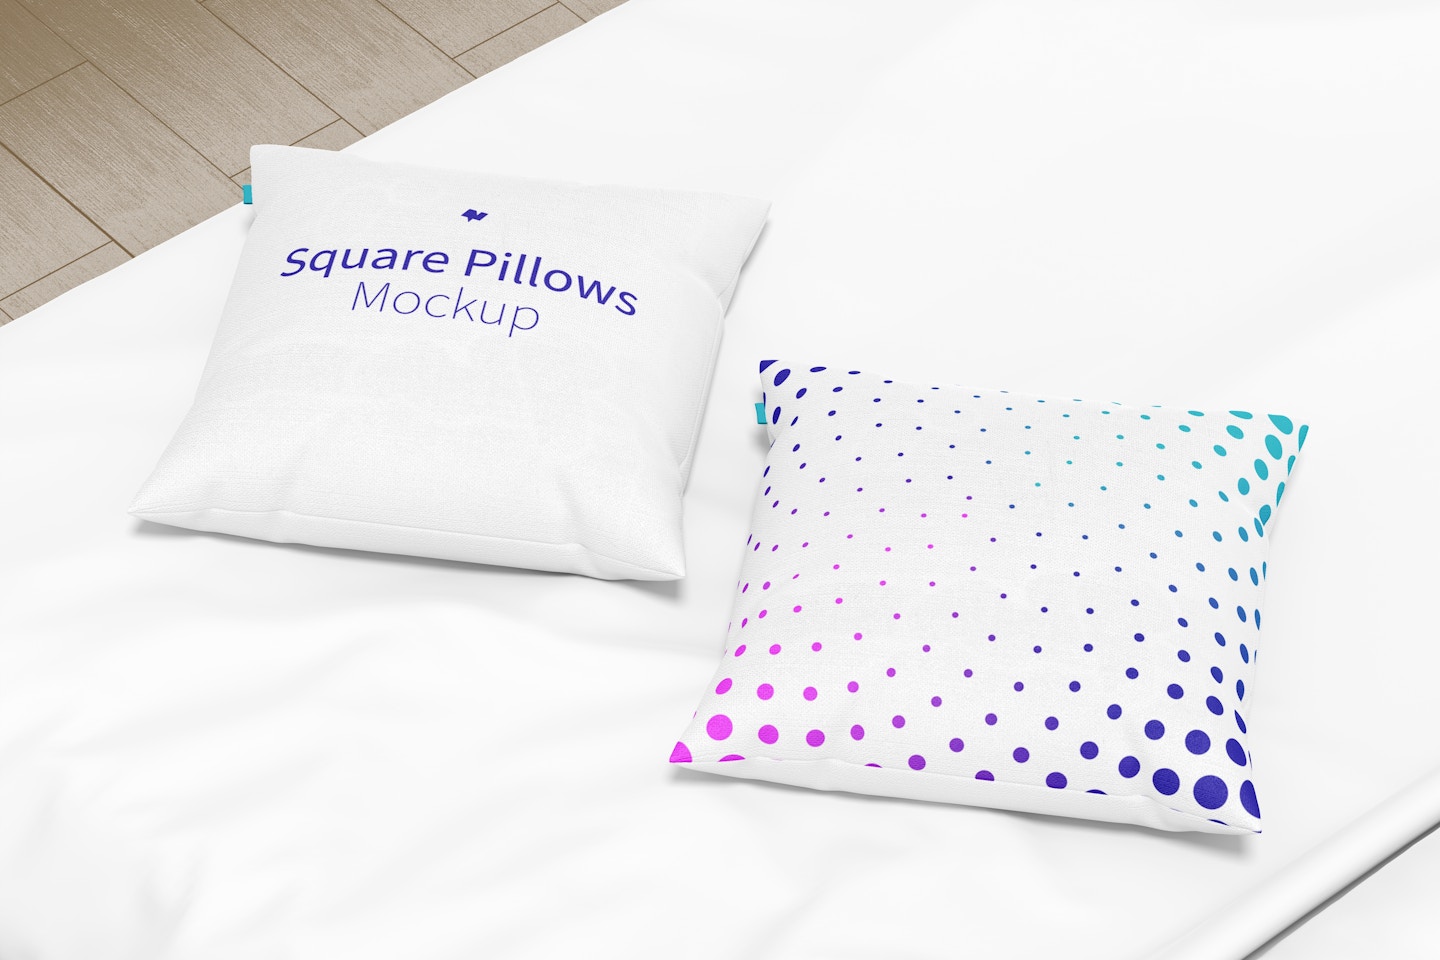 Square Pillows Mockup, Perspective